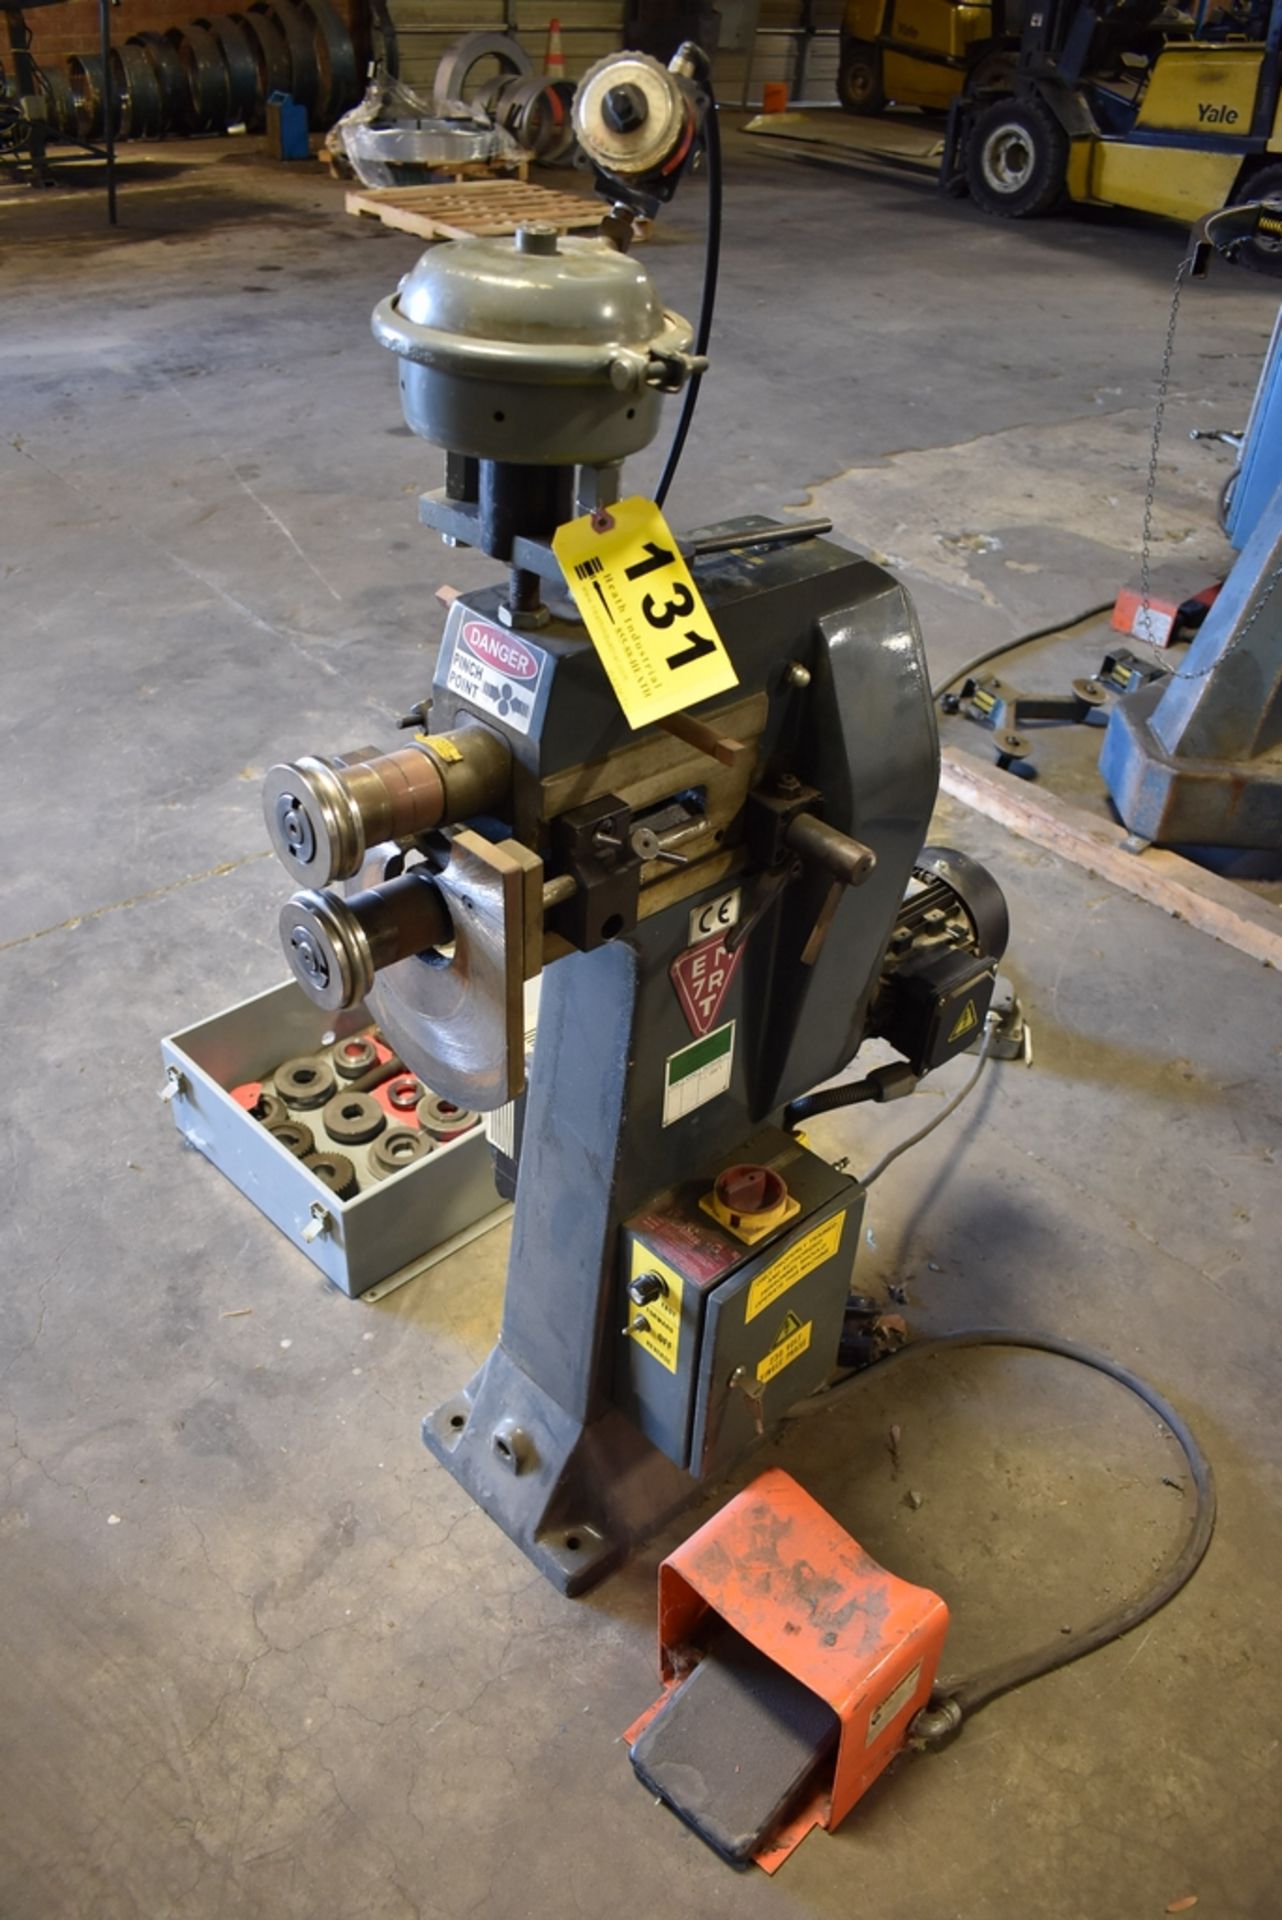 EMPIRE MODEL EM7RT POWER ROTARY BEADING MACHINE S/N N/A: WITH FOOT PEDAL CONTROL - Image 2 of 6